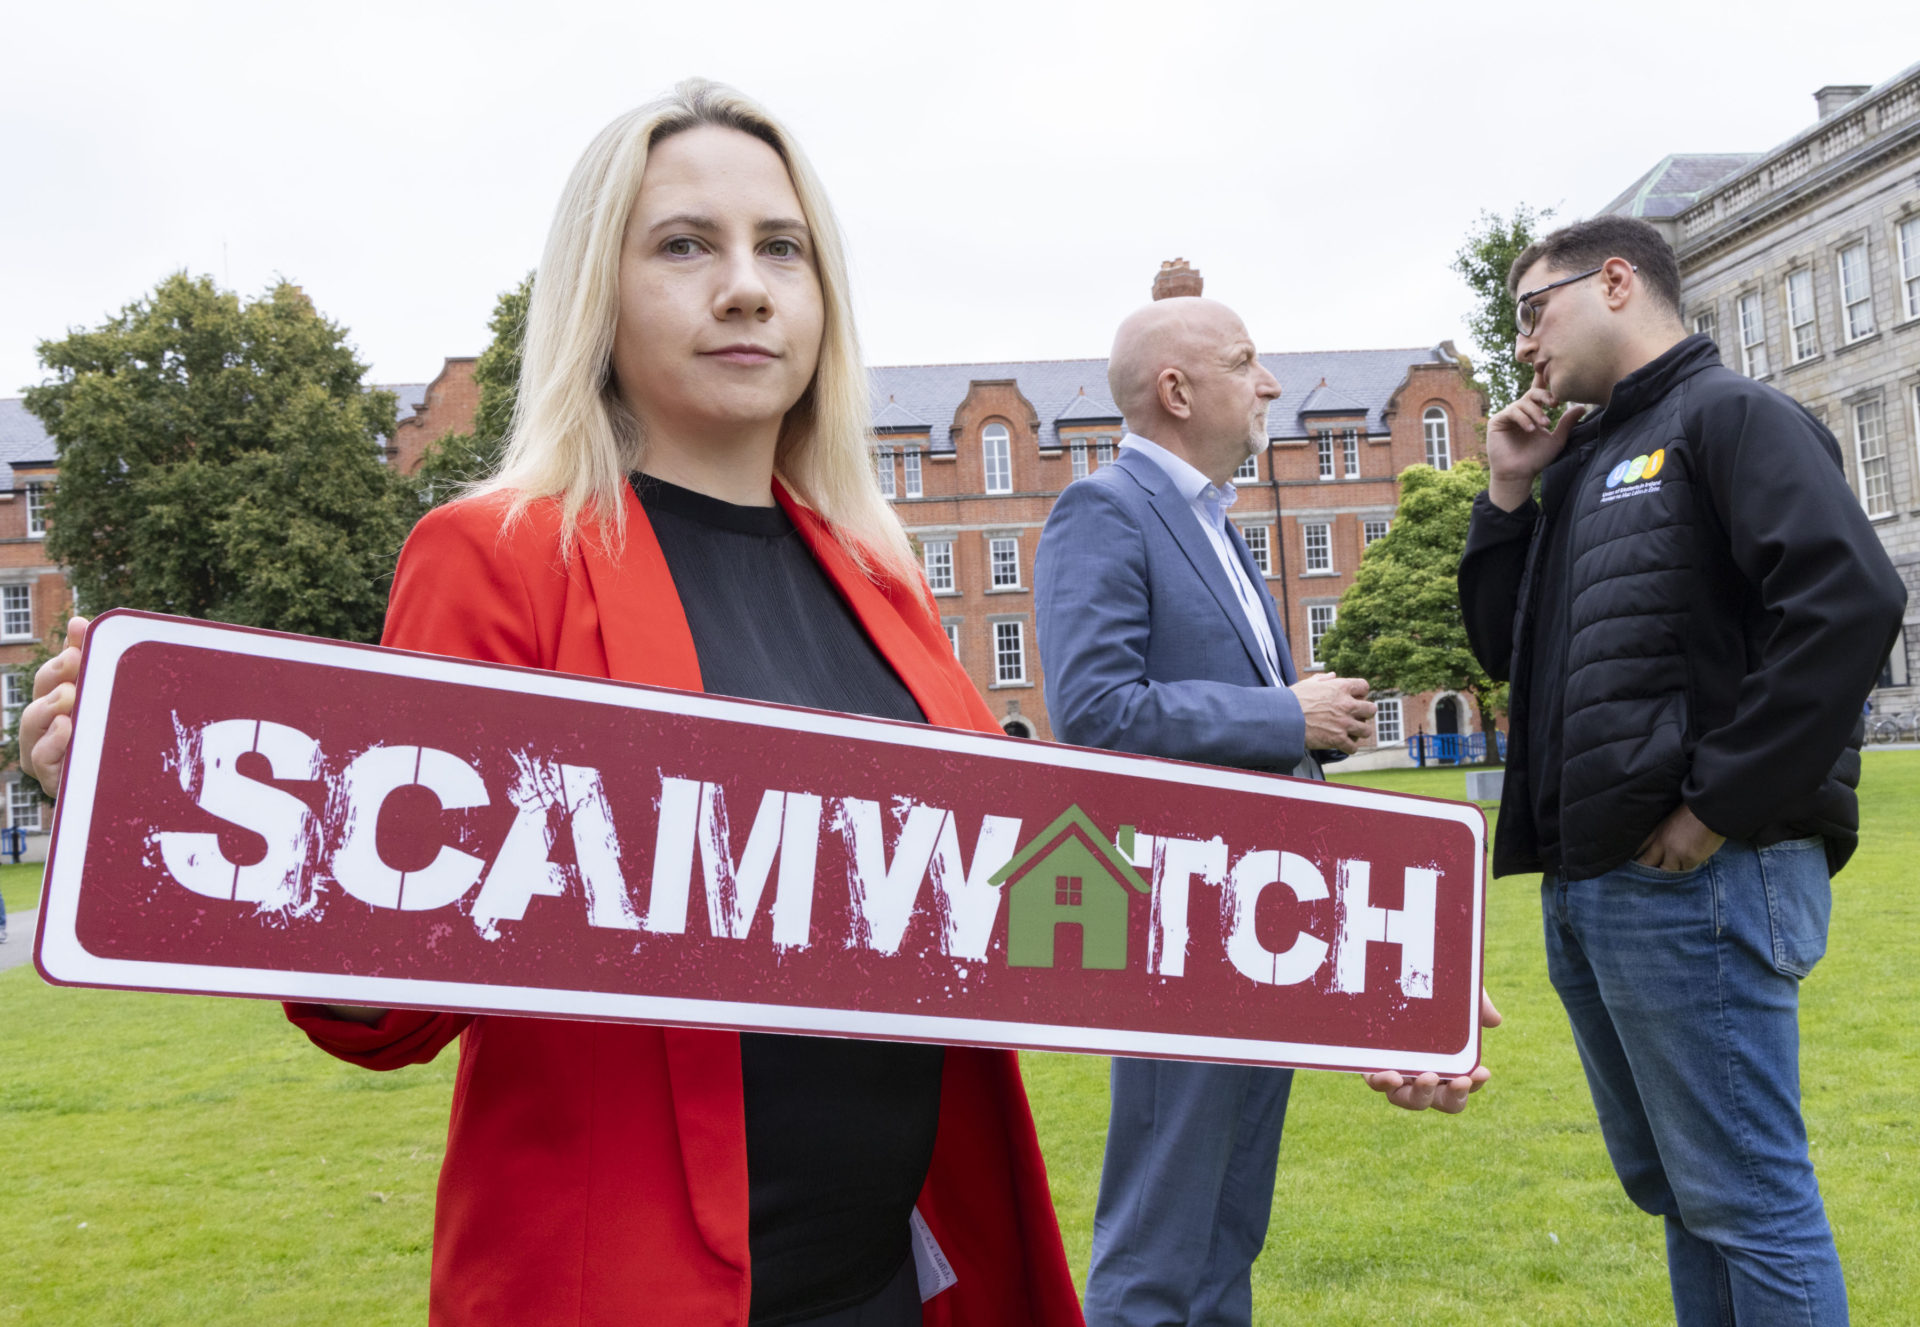 Threshold, the USI and ICOS launch Scamwatch at Trinity College, Dublin